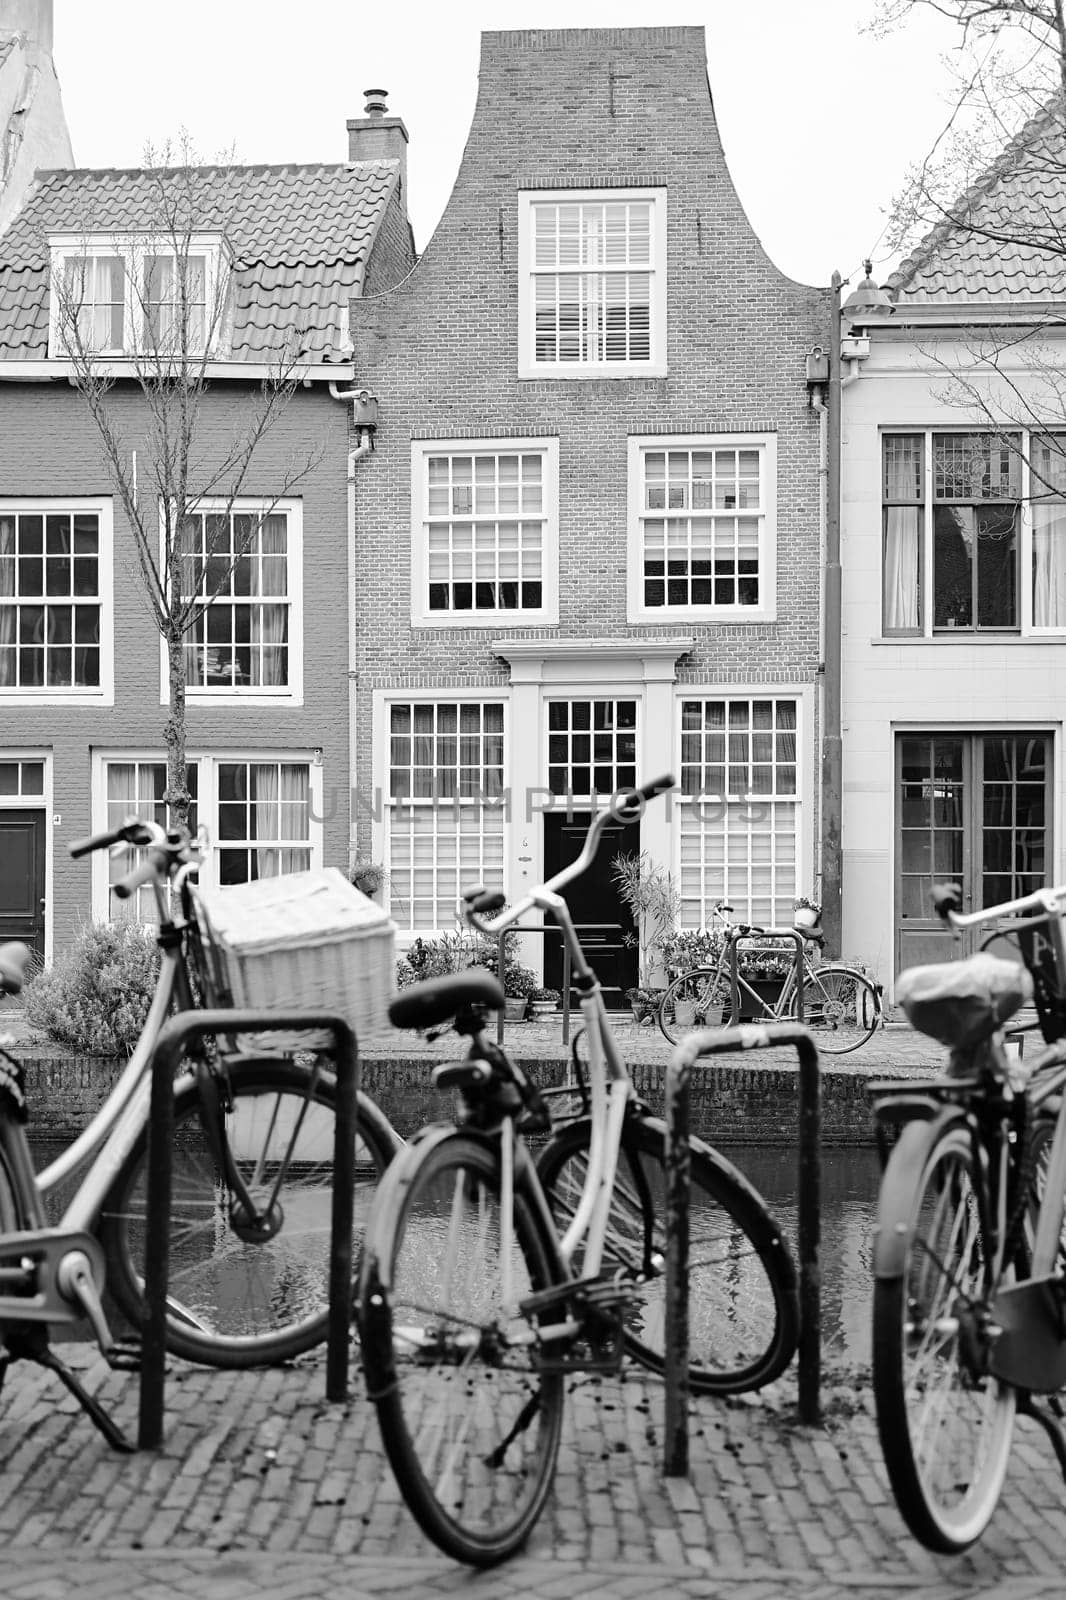 Bicycles parked alongside a channel on beautiful old buildings background.